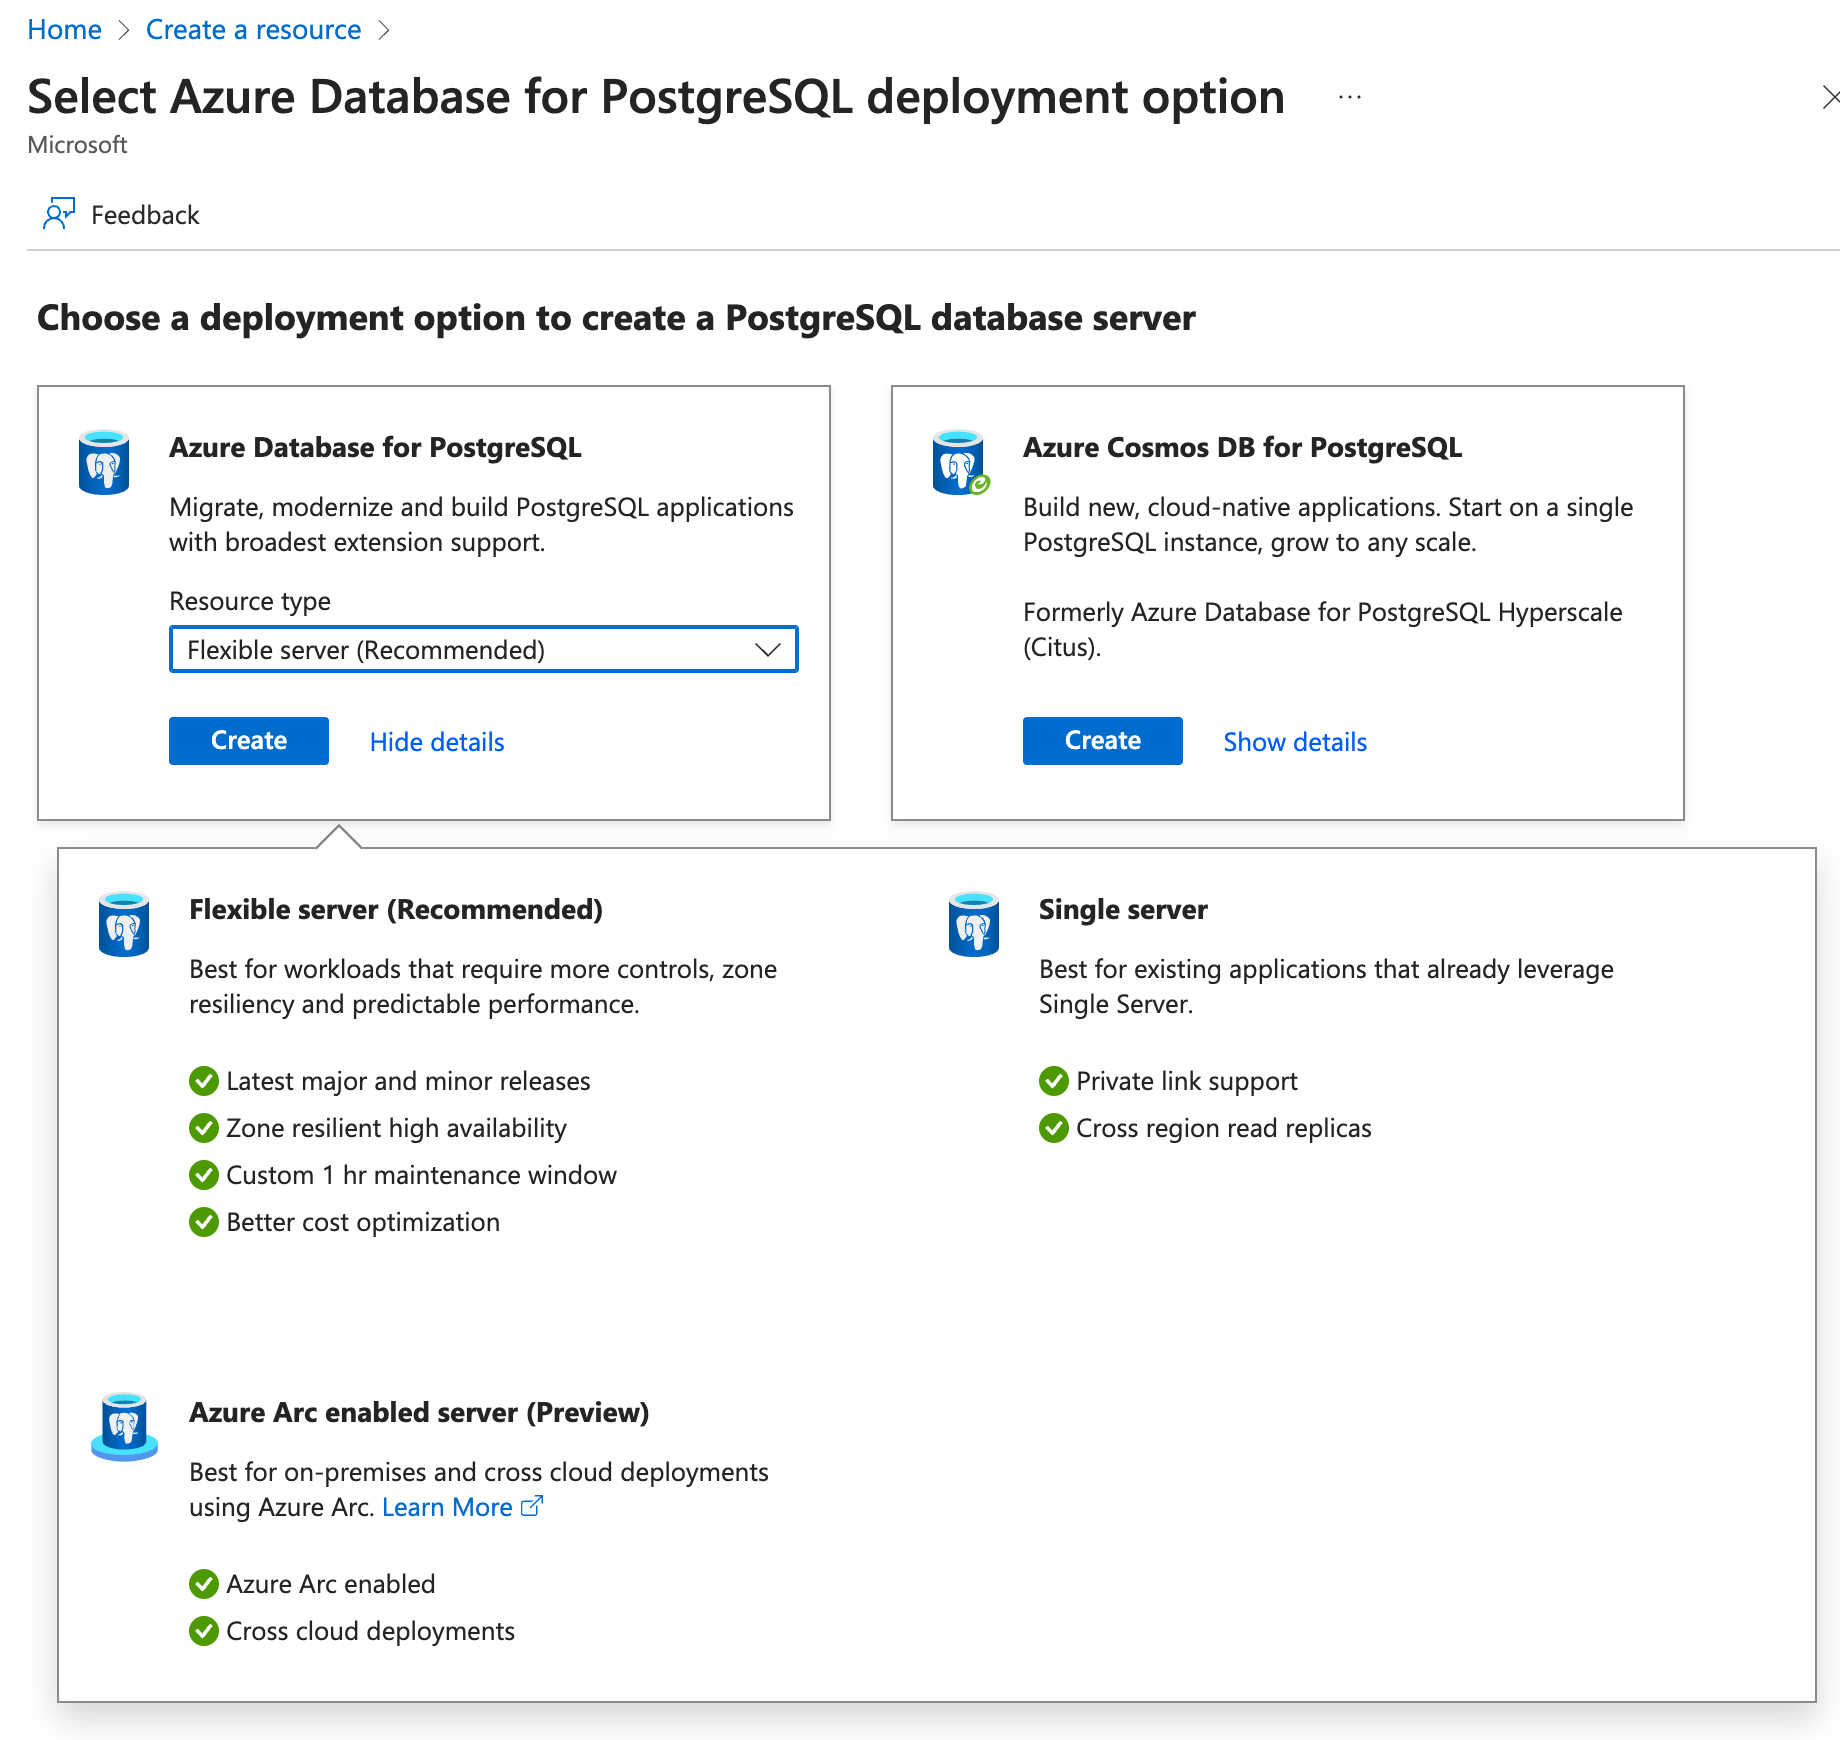 Screenshot of the Azure portal that shows the Select Azure Database for PostgreSQL deployment option page.